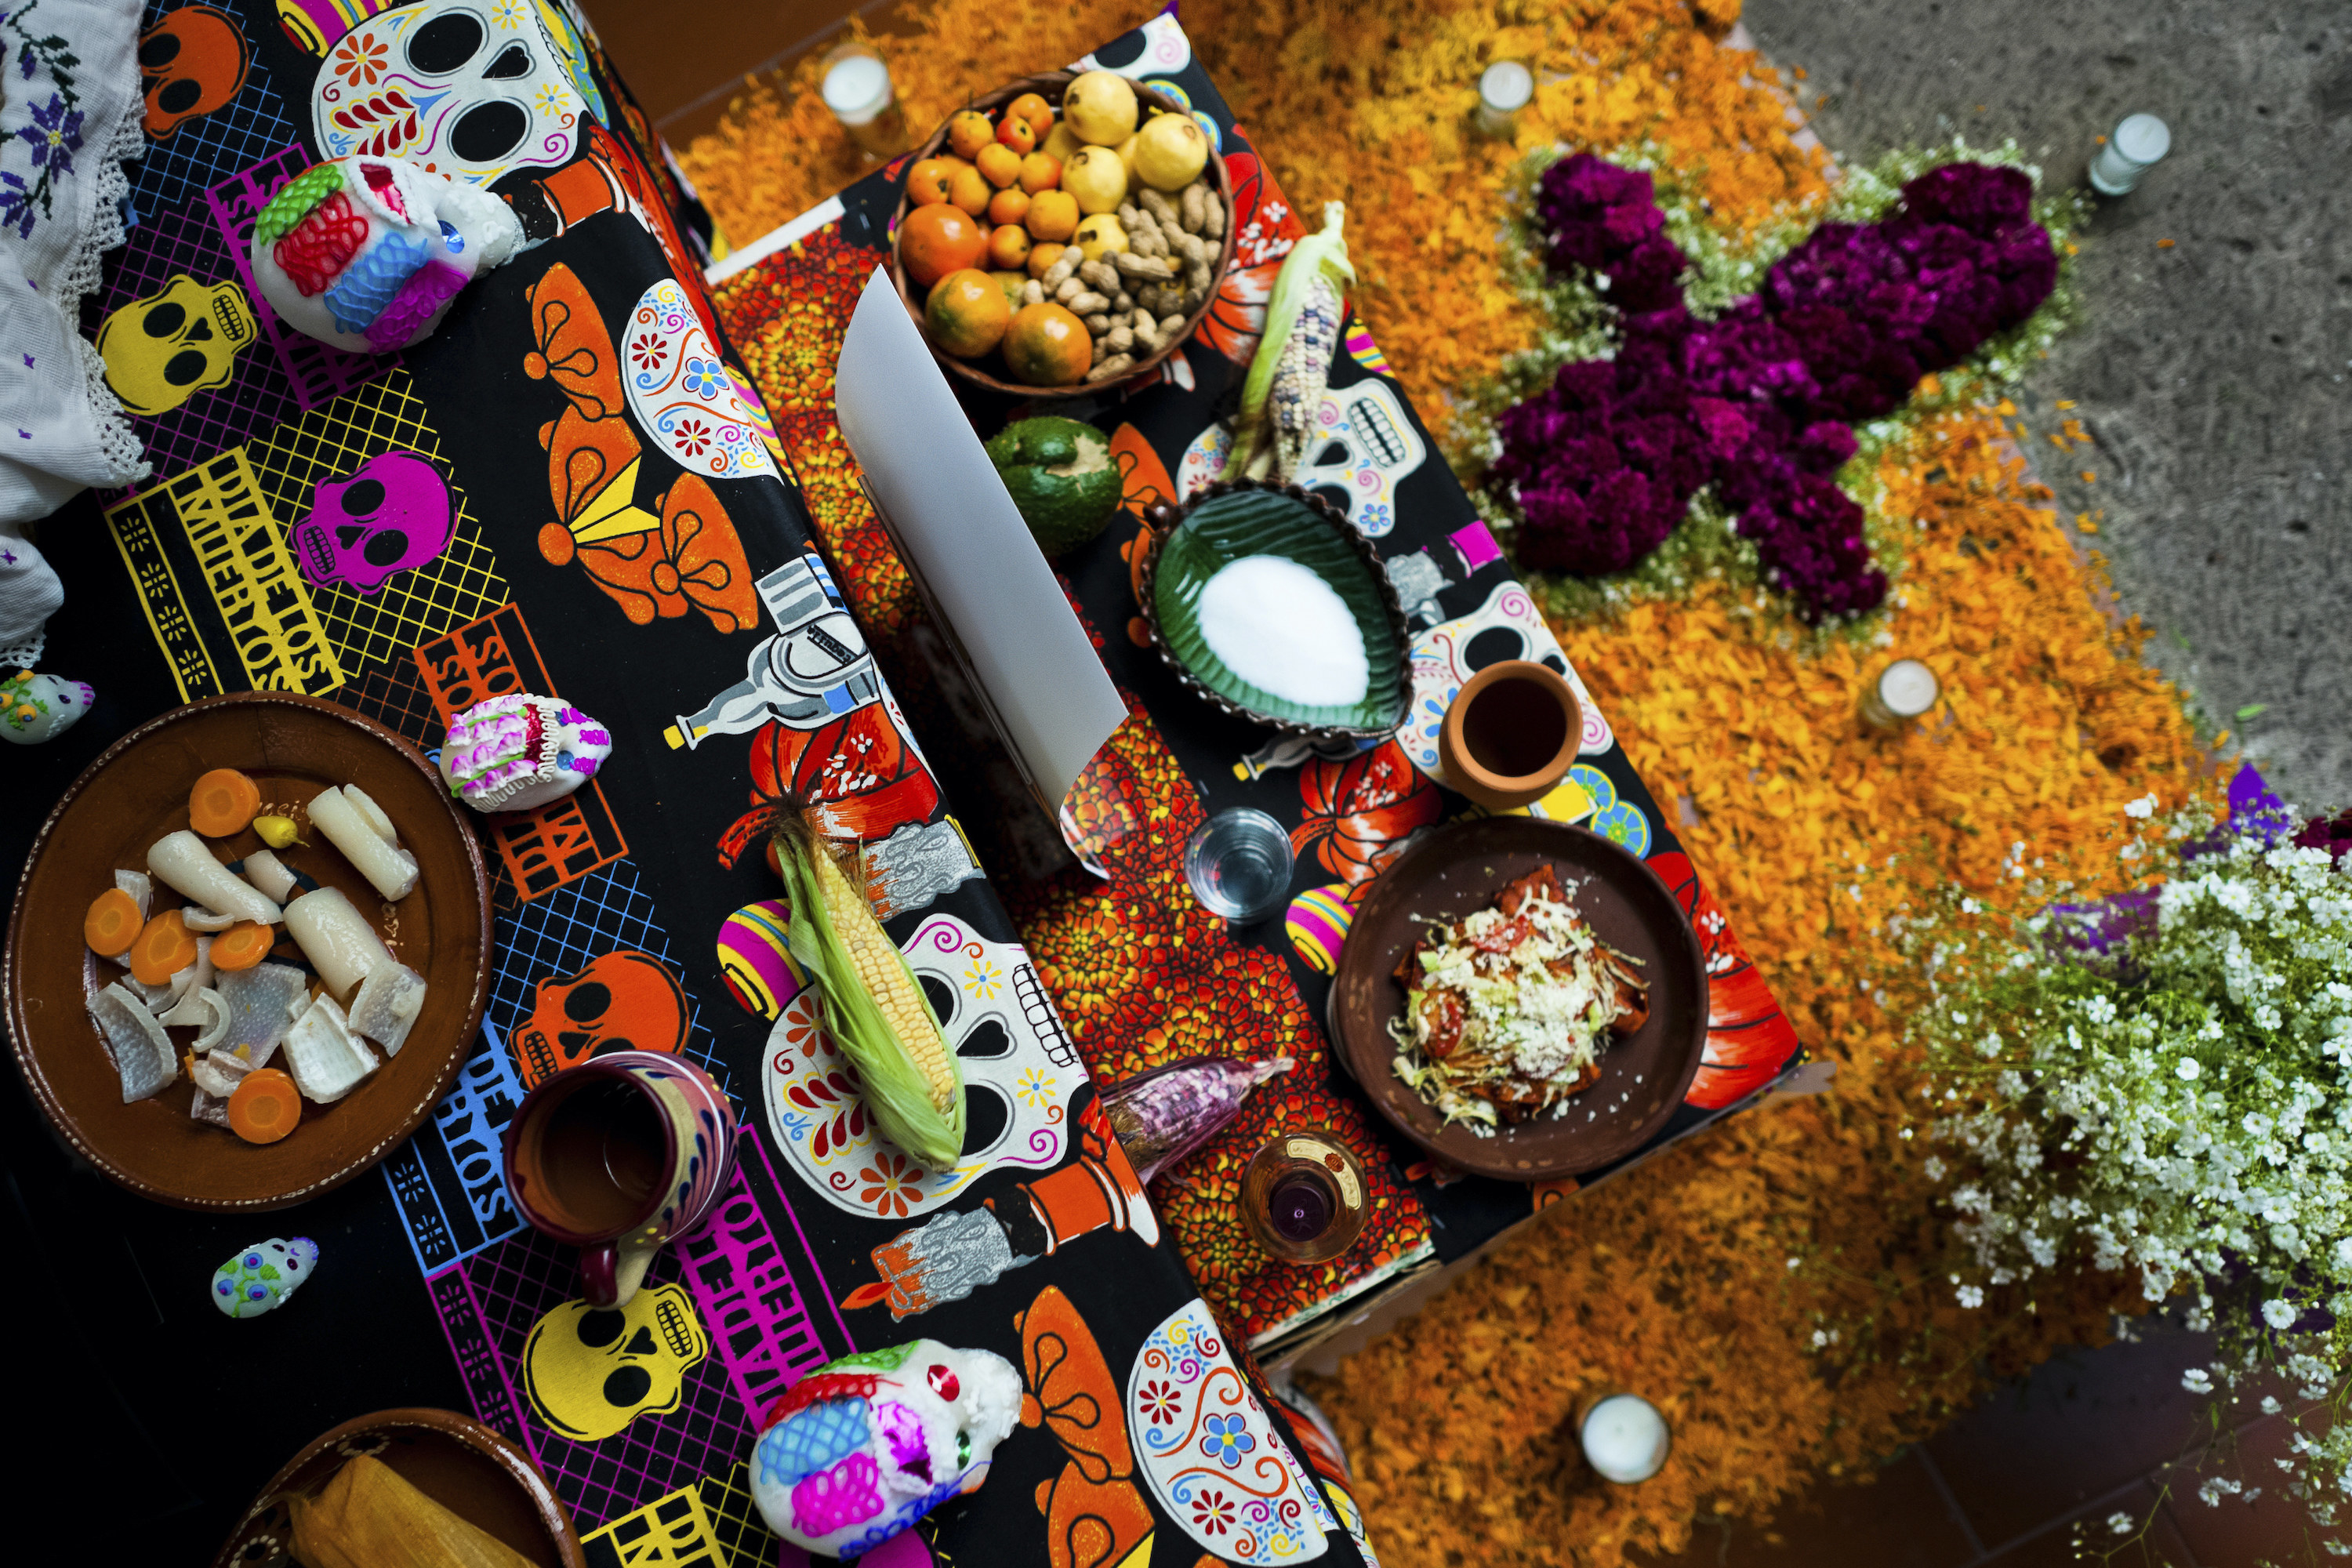 An array of food, including an ear of corn and a bowl of raw vegetables, on a rug and a cloth depicting drawings of skulls and other items